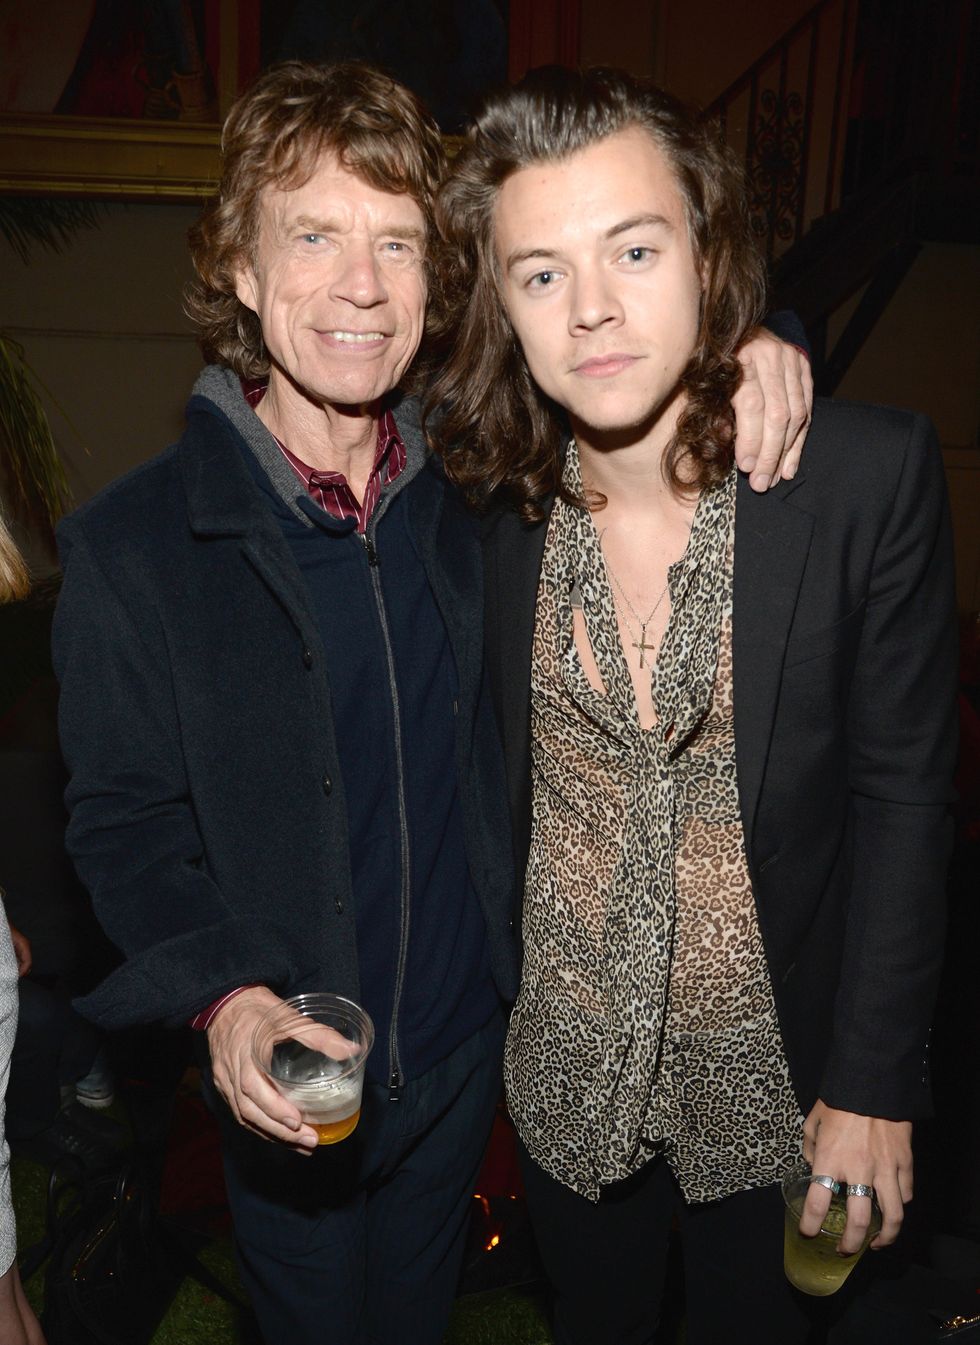 Mick Jagger Says Harry Styles “Doesn’t Have a Voice Like Mine Or Move On Stage Like Me”